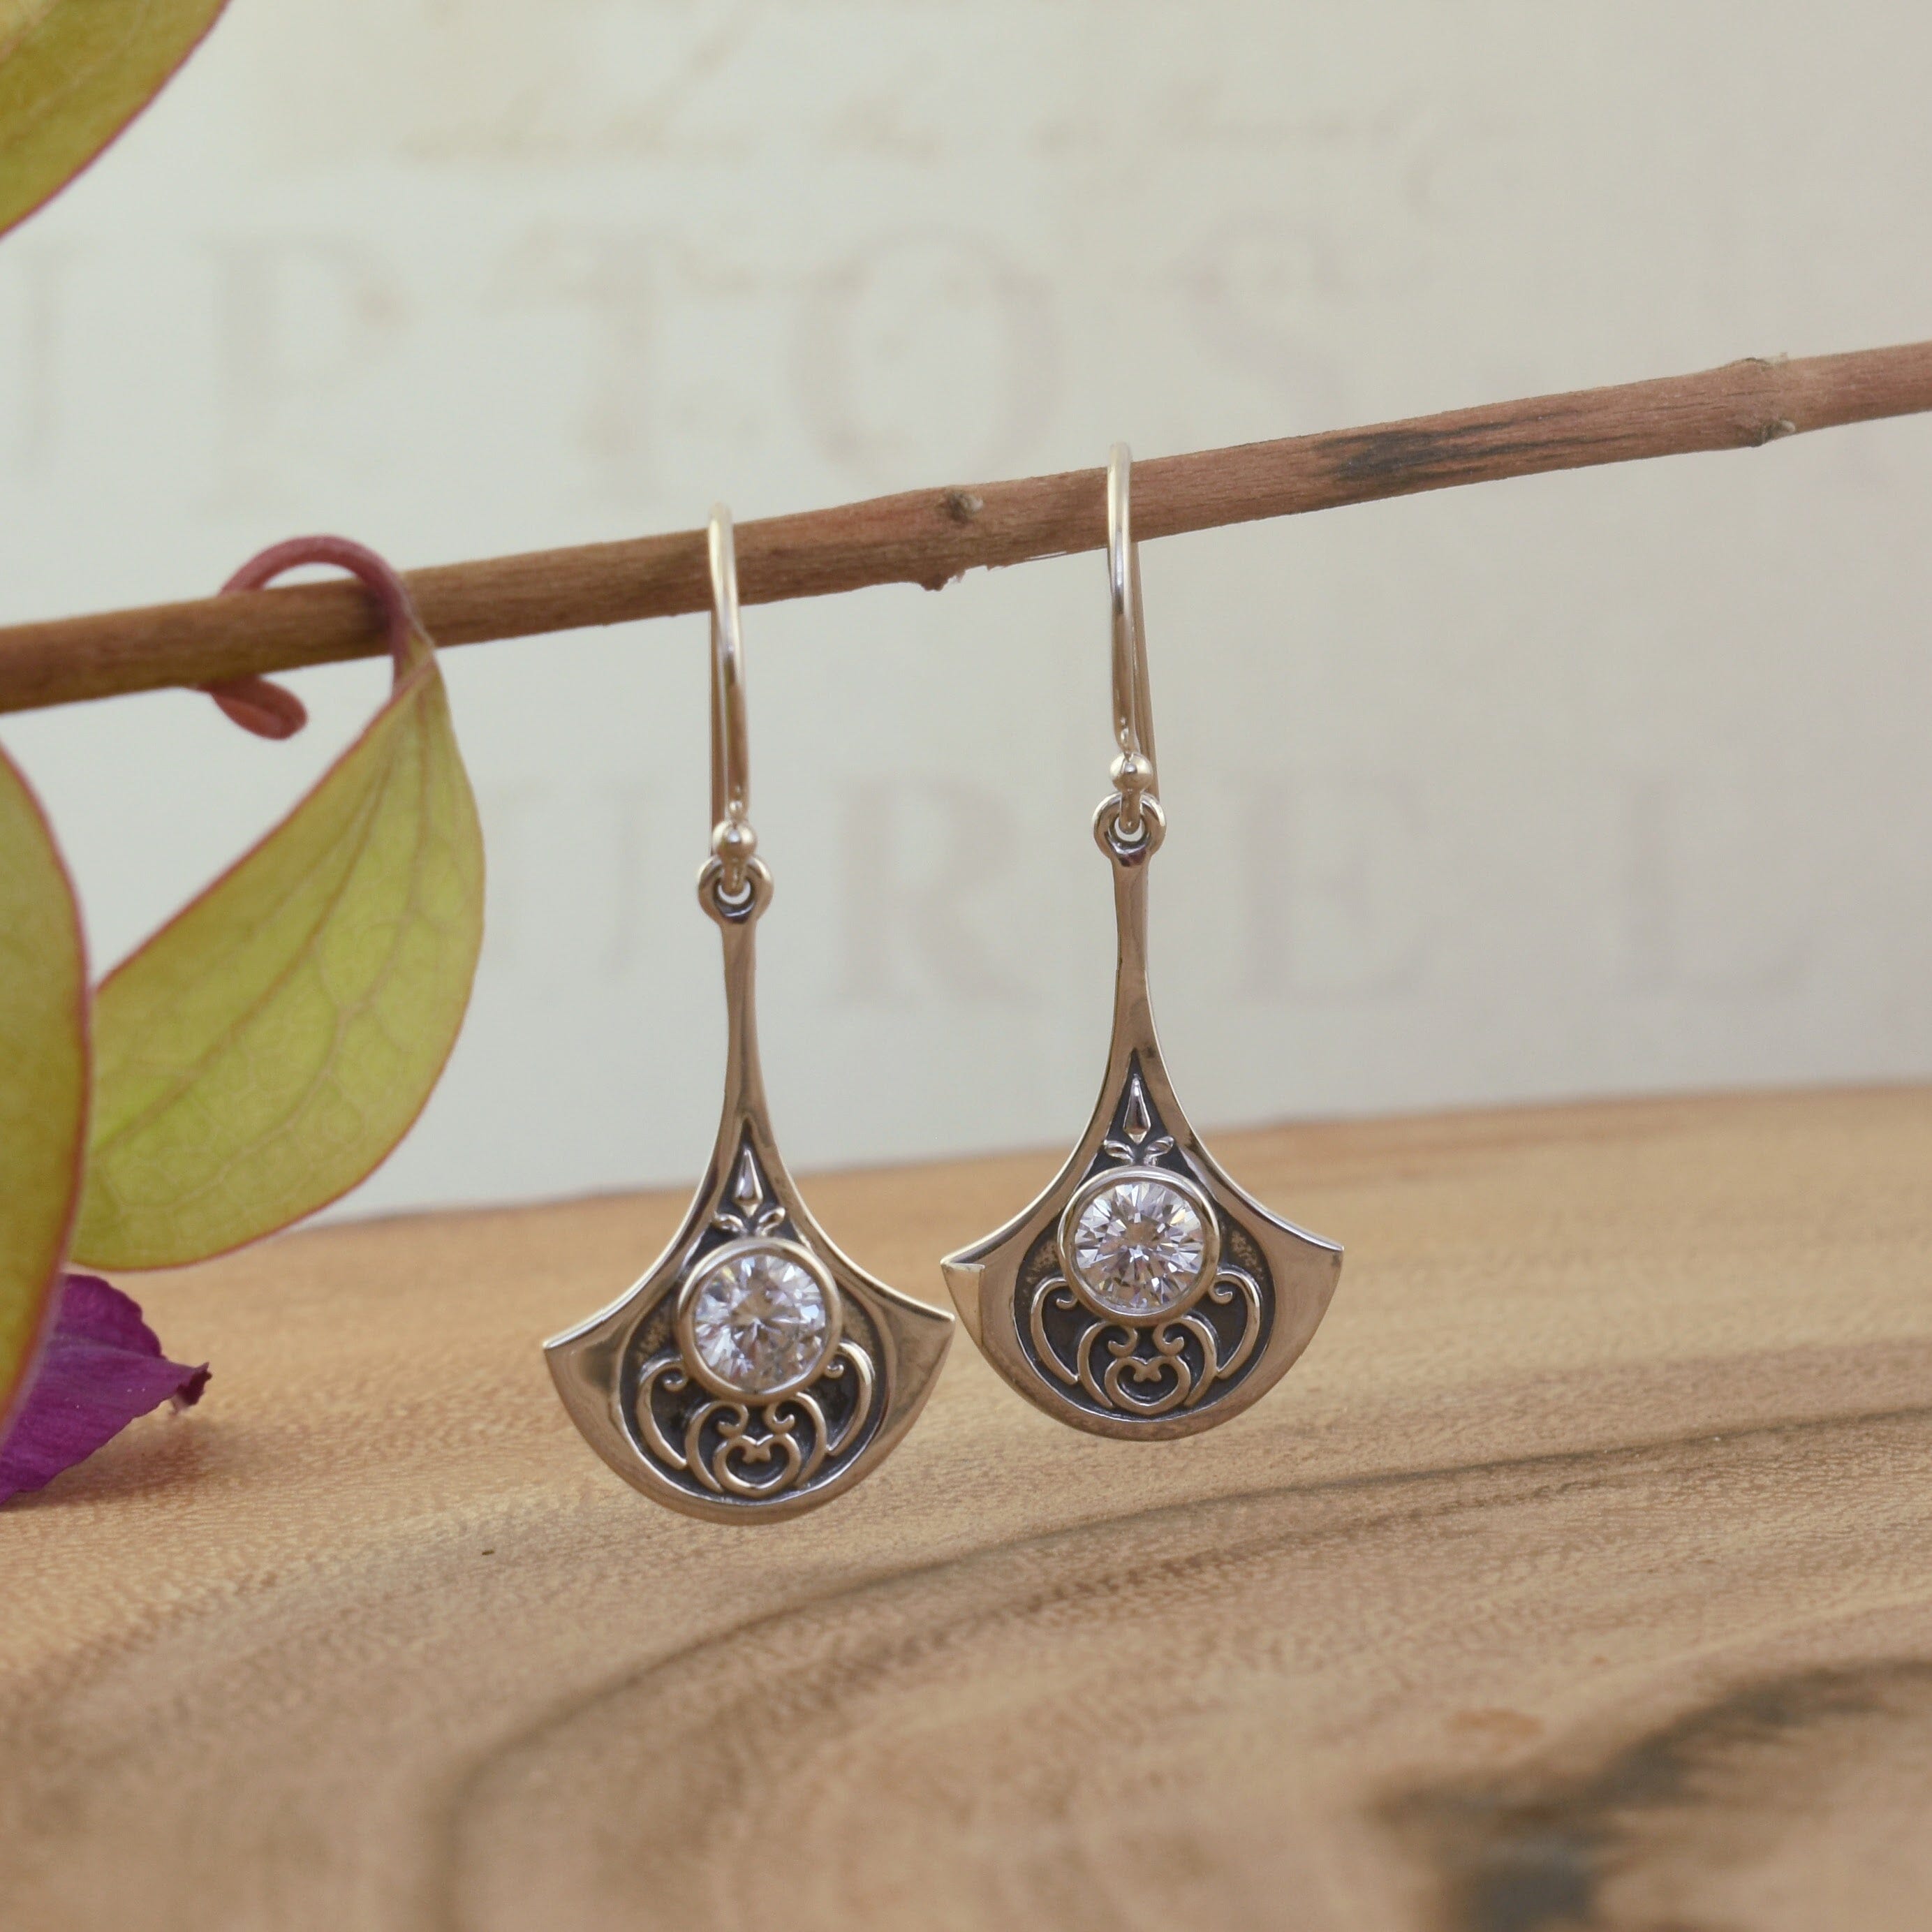 .925 sterling silver dangle earrings with bali design and sterling silver accent stones